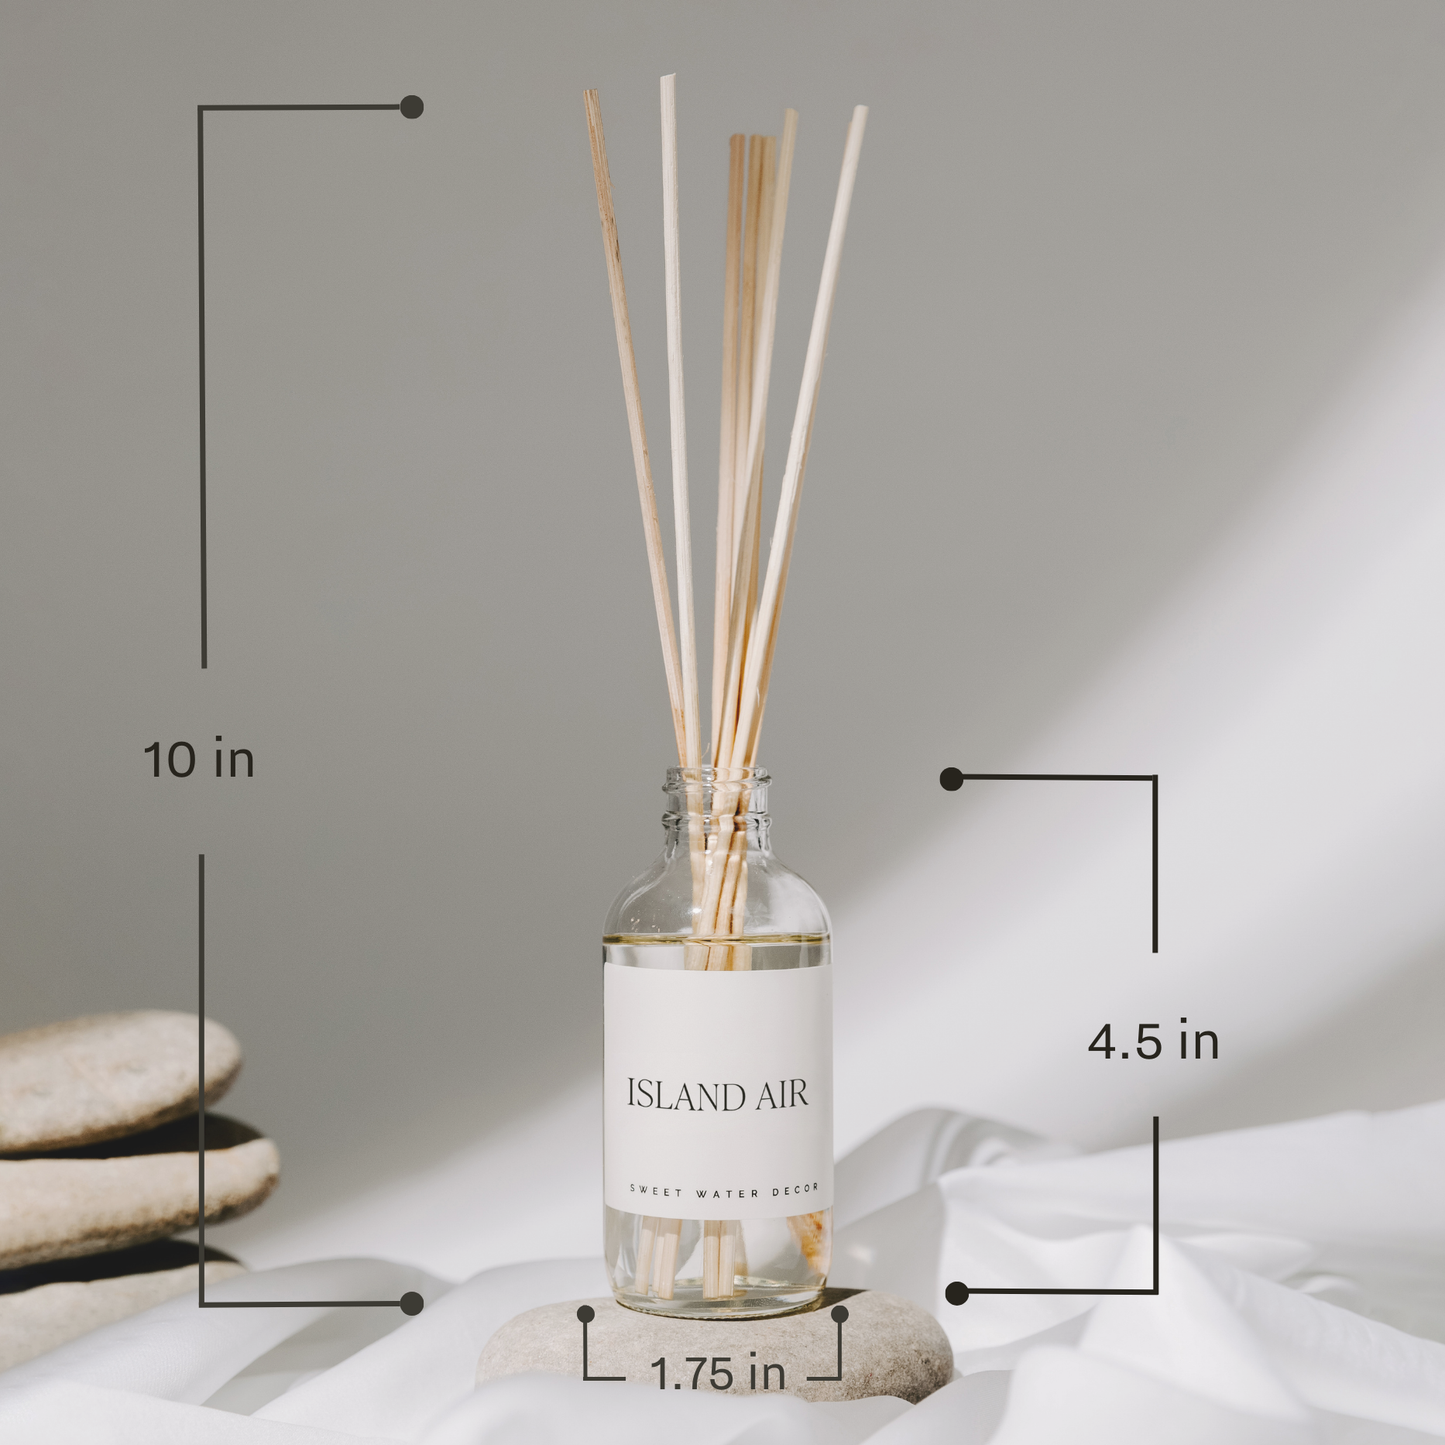 Sandalwood Rose Reed Diffuser - Gifts & Home Decor